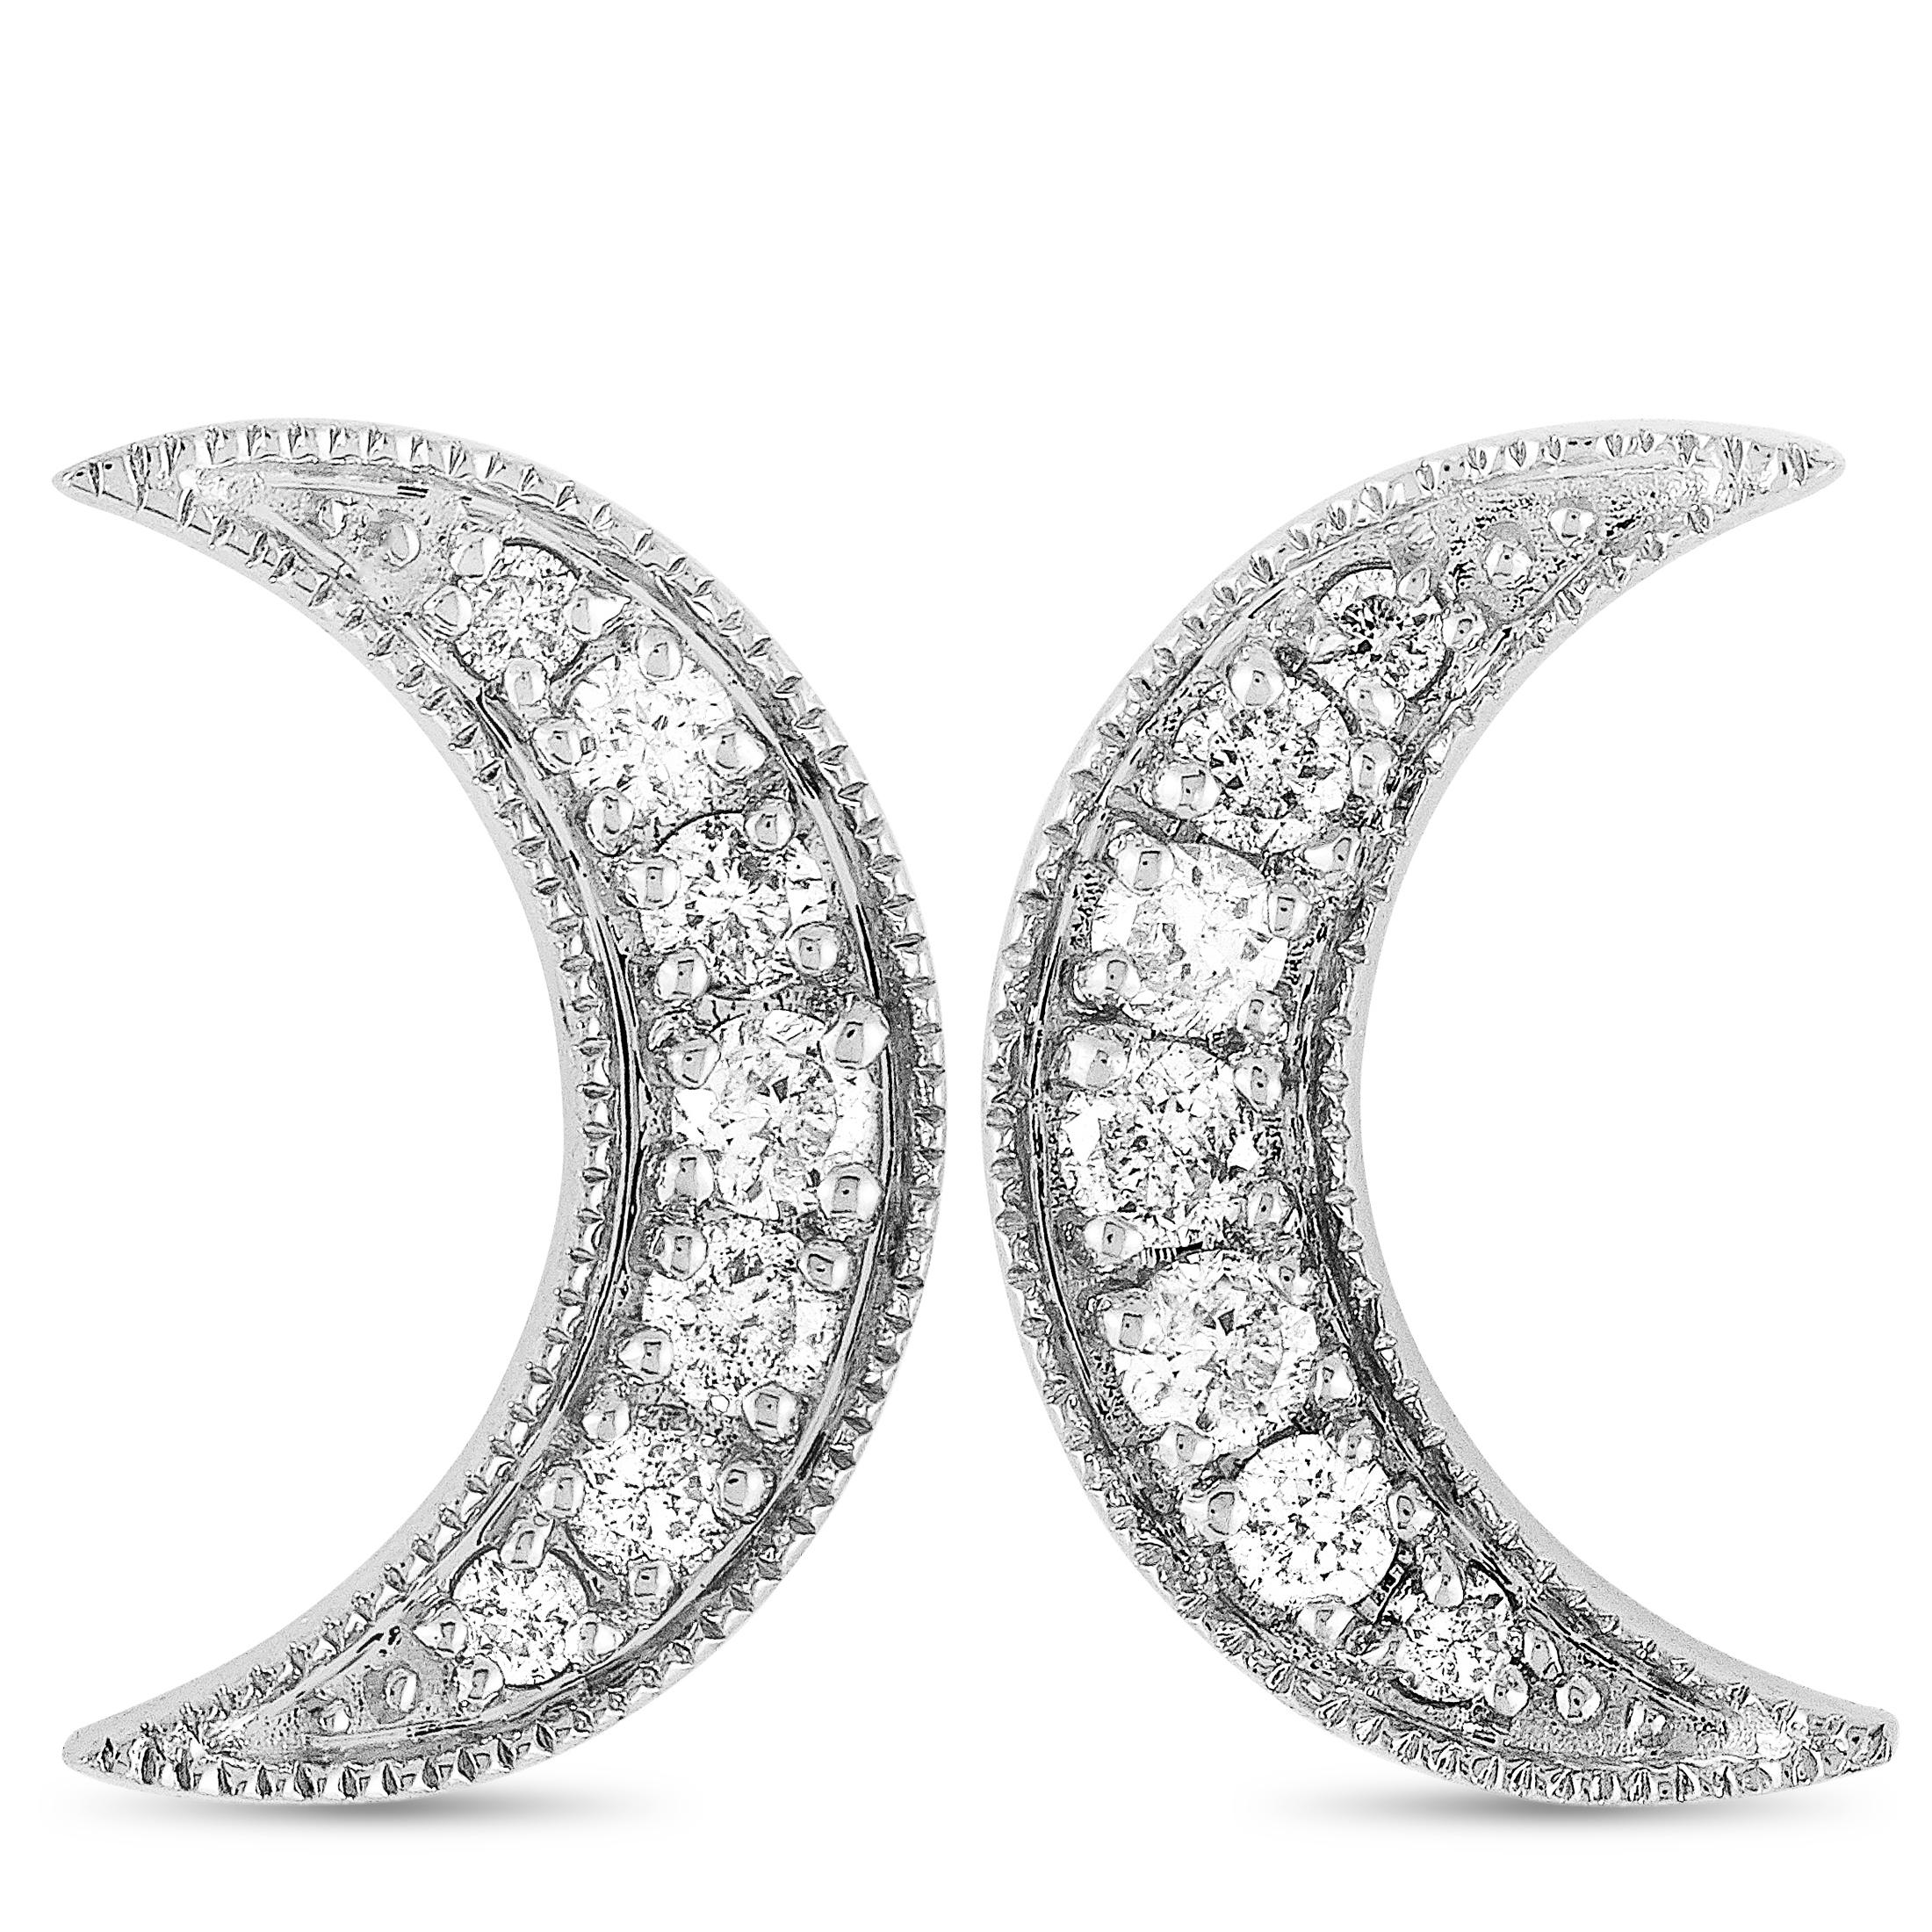 These LB Exclusive earrings are made out of 14K white gold and diamonds that total 0.15 carats. The earrings measure 0.37” in length and 0.25” in width, and each of the two weighs 0.55 grams.

The pair is offered in brand new condition and includes